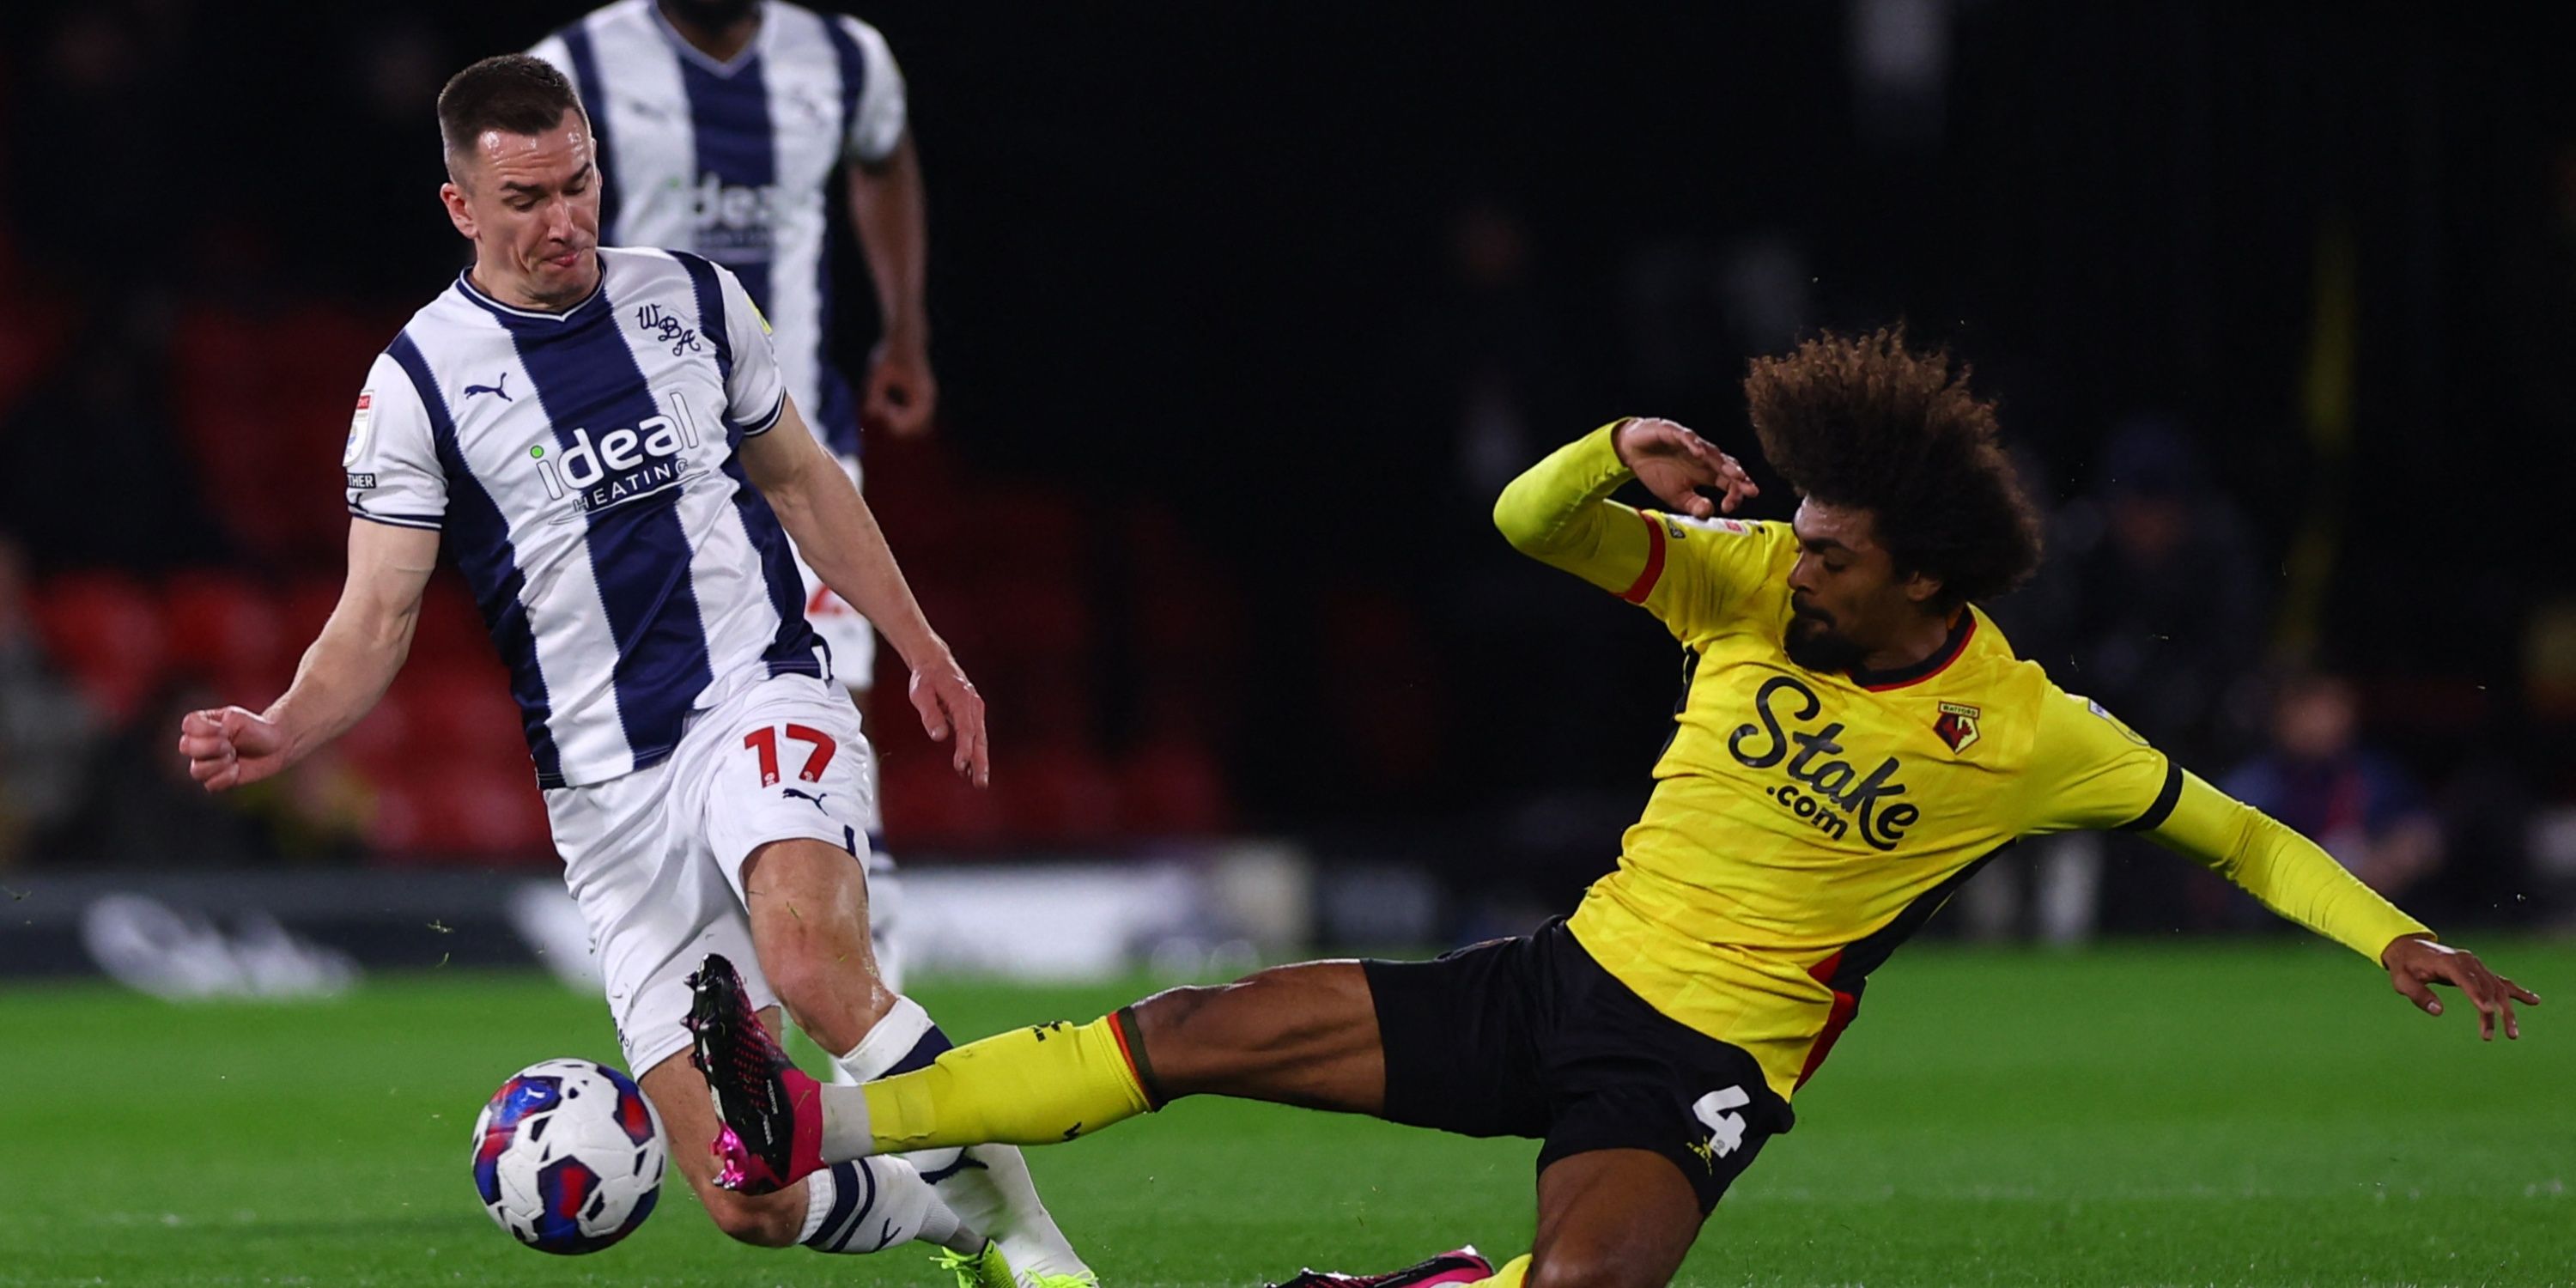 corberan must now bench west brom's 6/10 star after saints showing